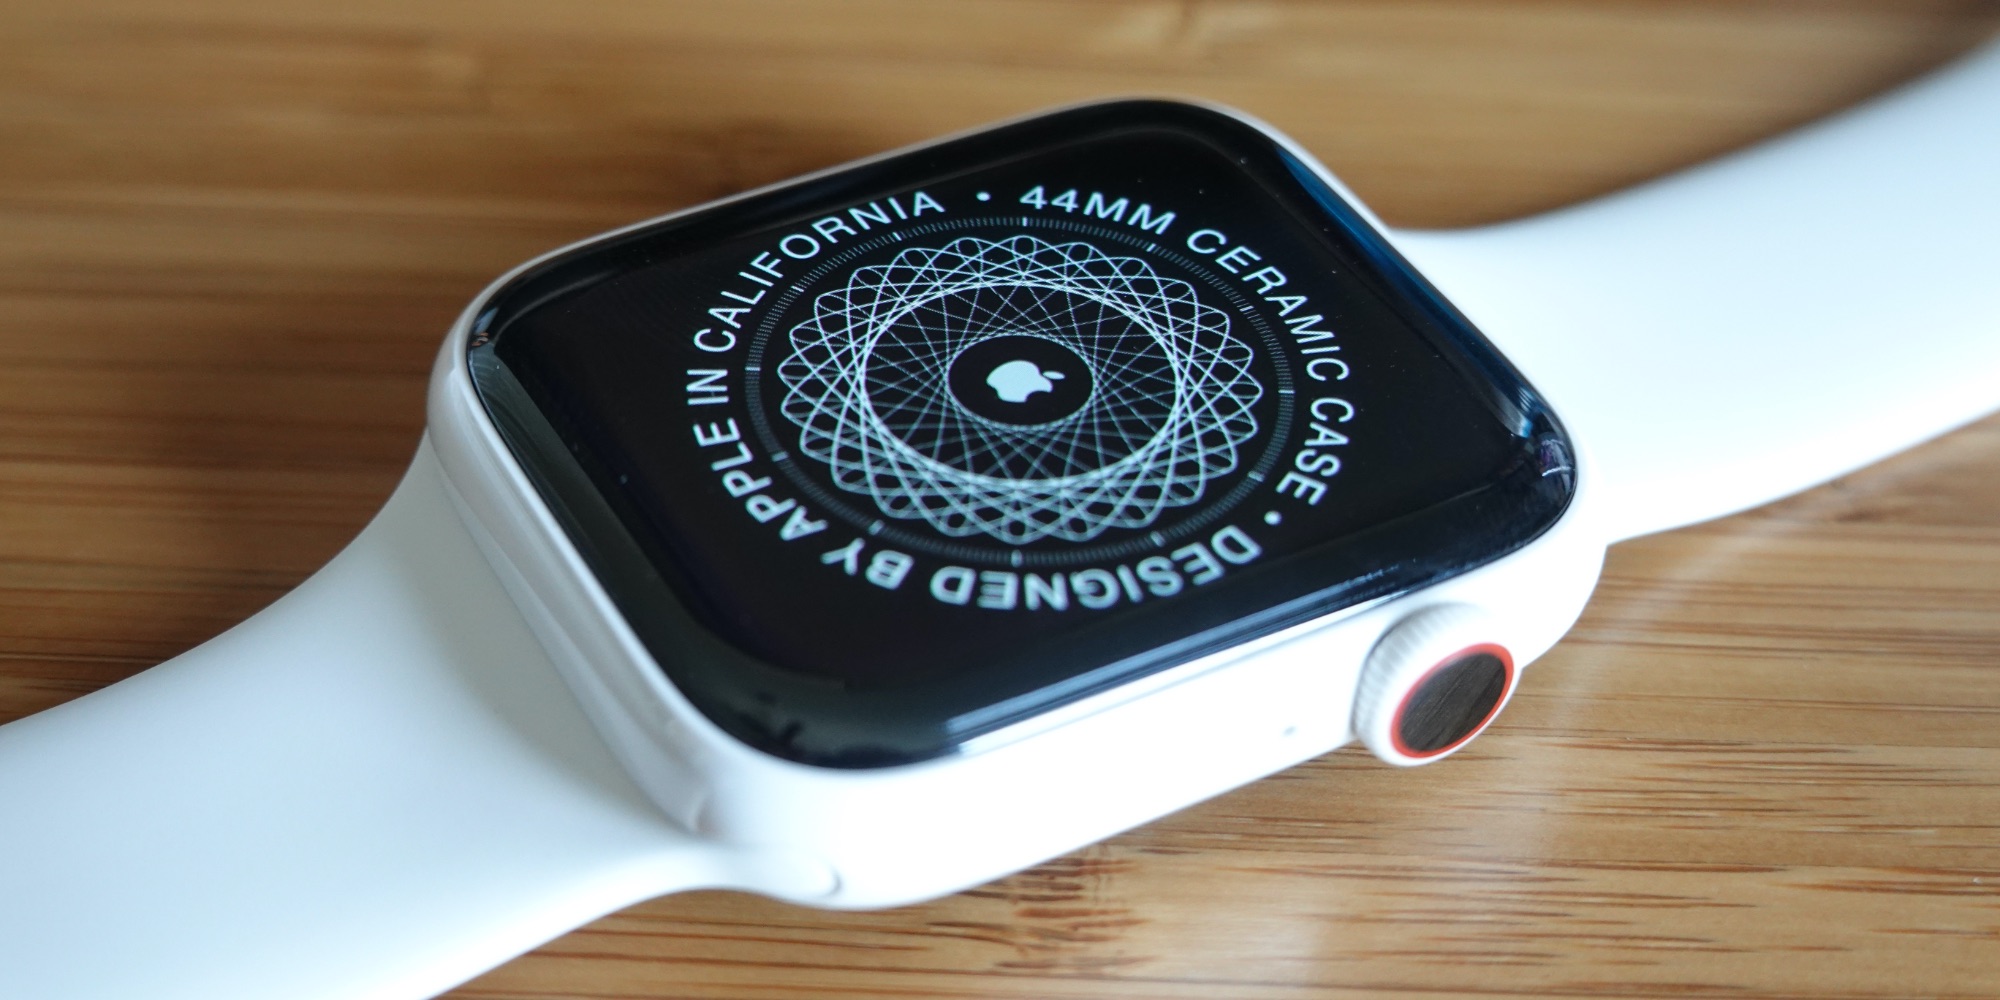 How to Repair a Broken or Scratched Apple Watch, or Get a Replacement